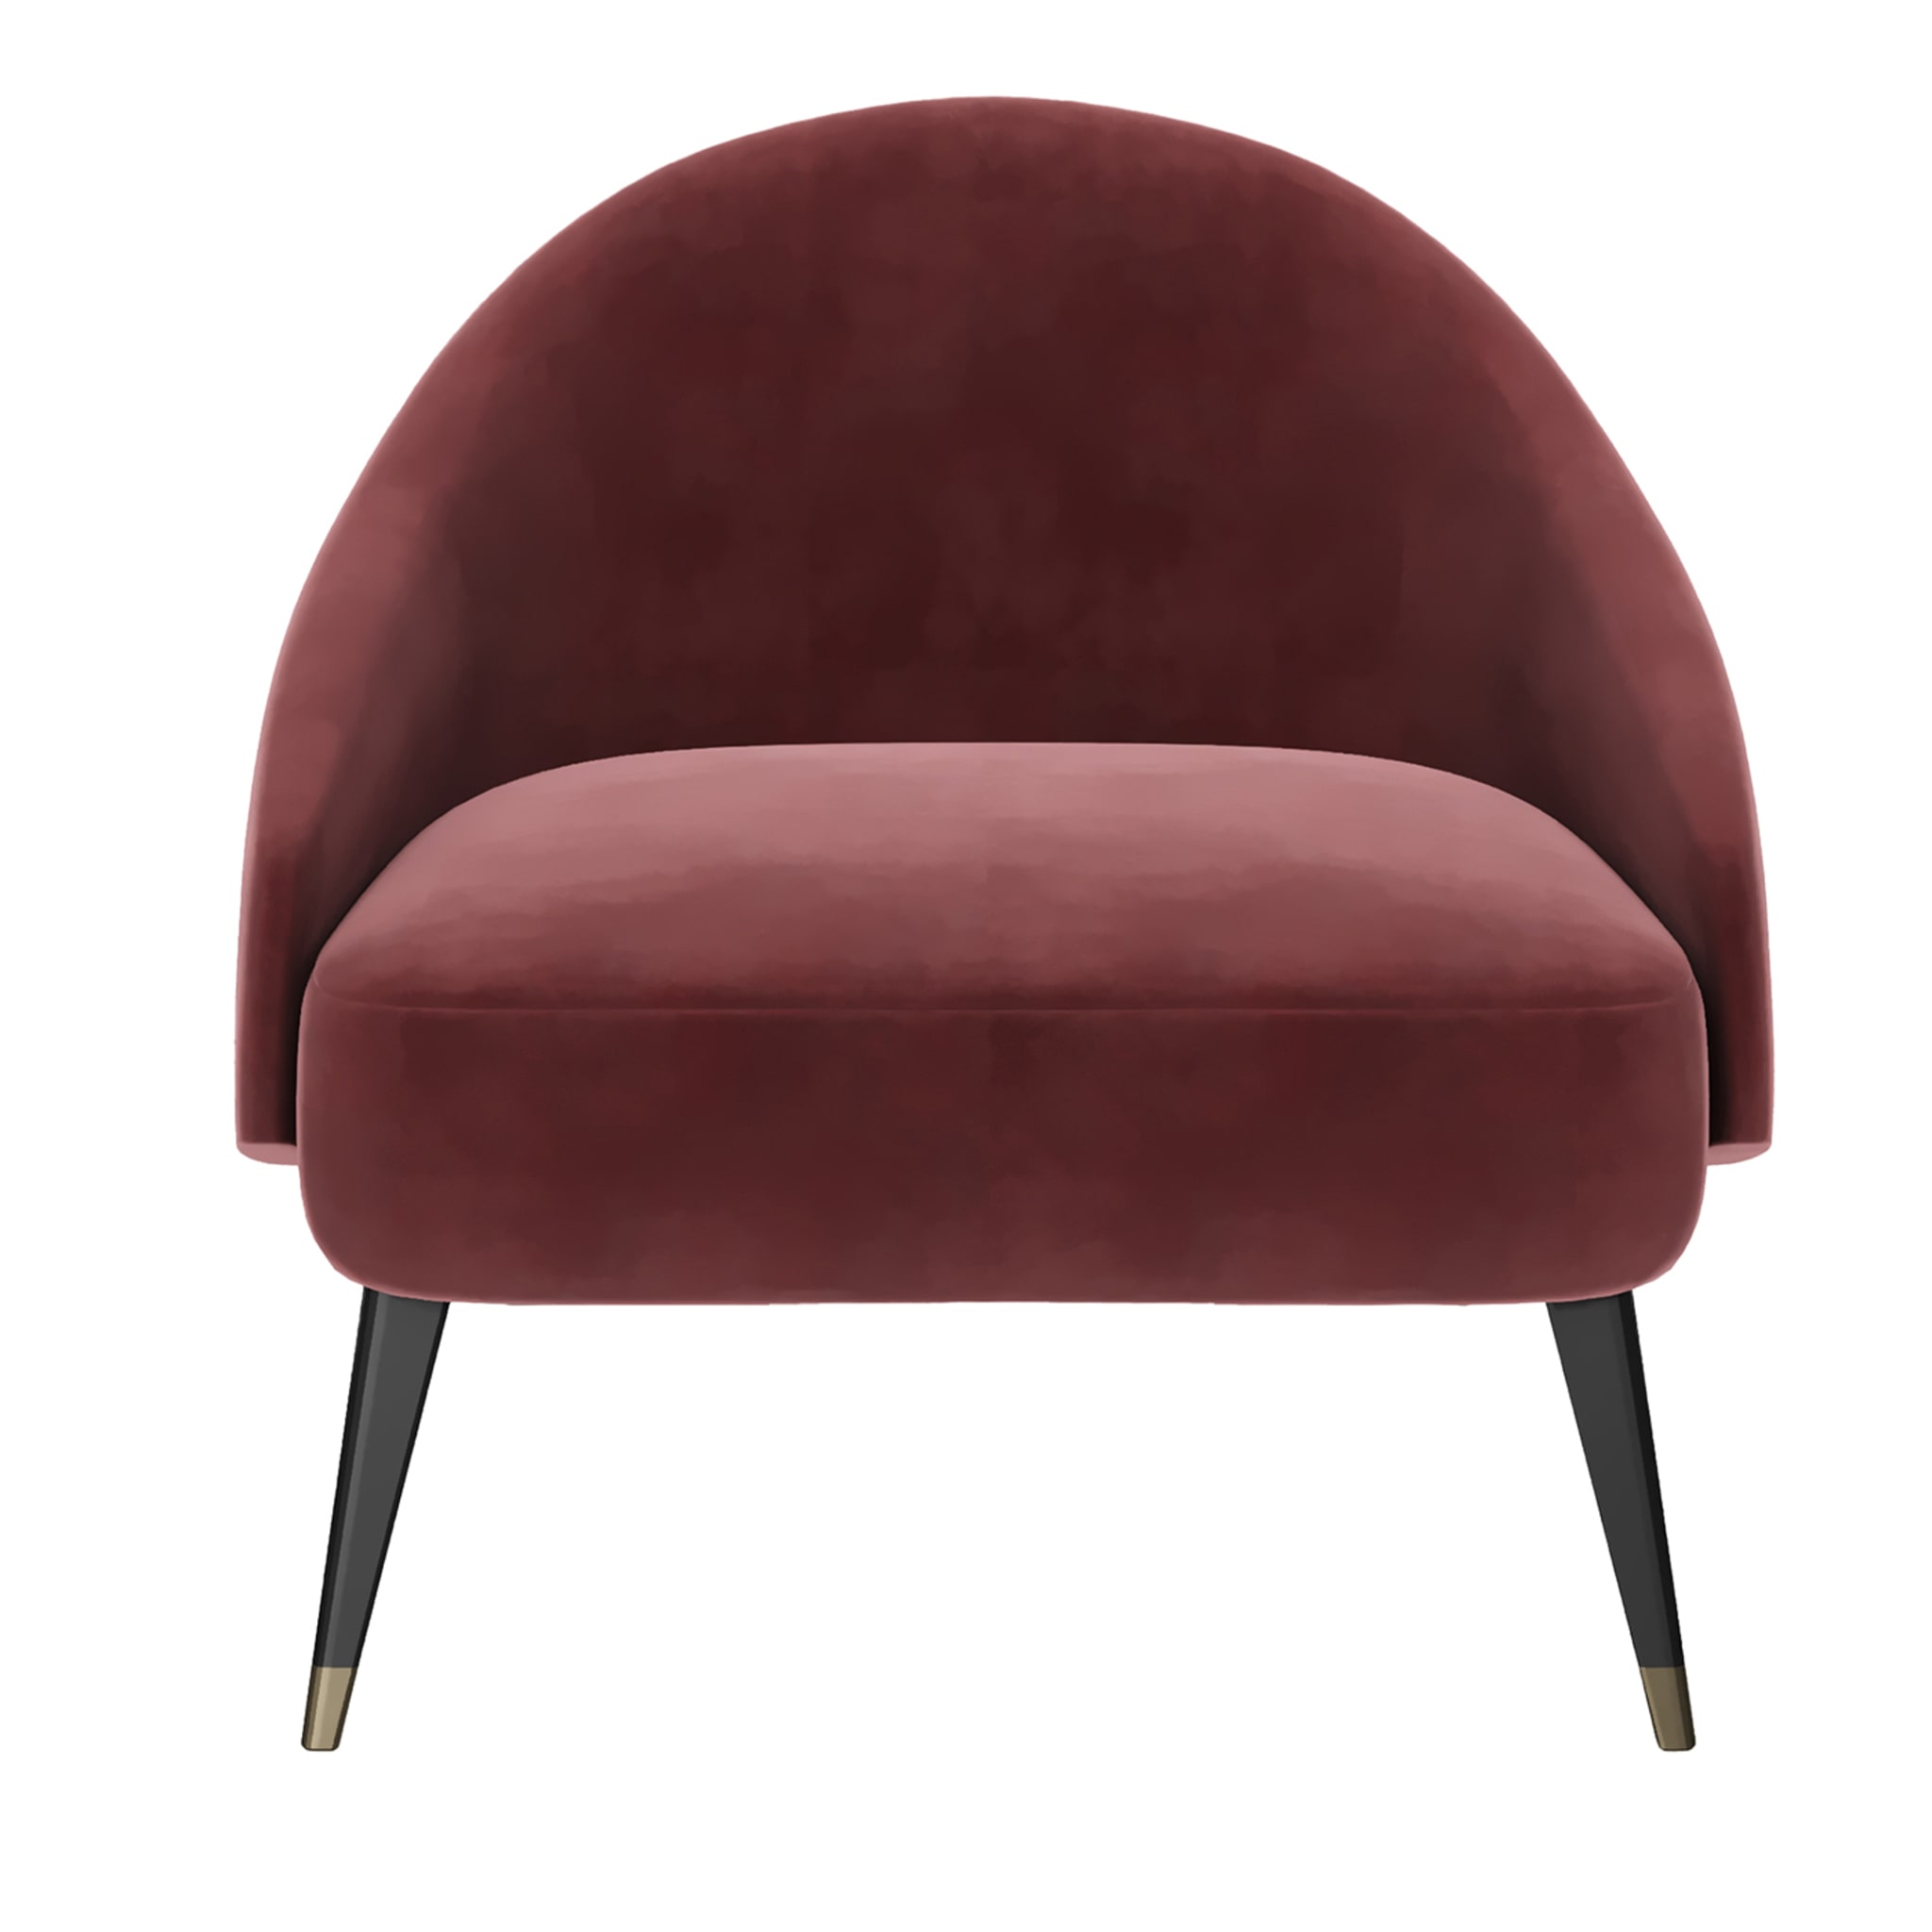 Minerva Red armchair - Main view